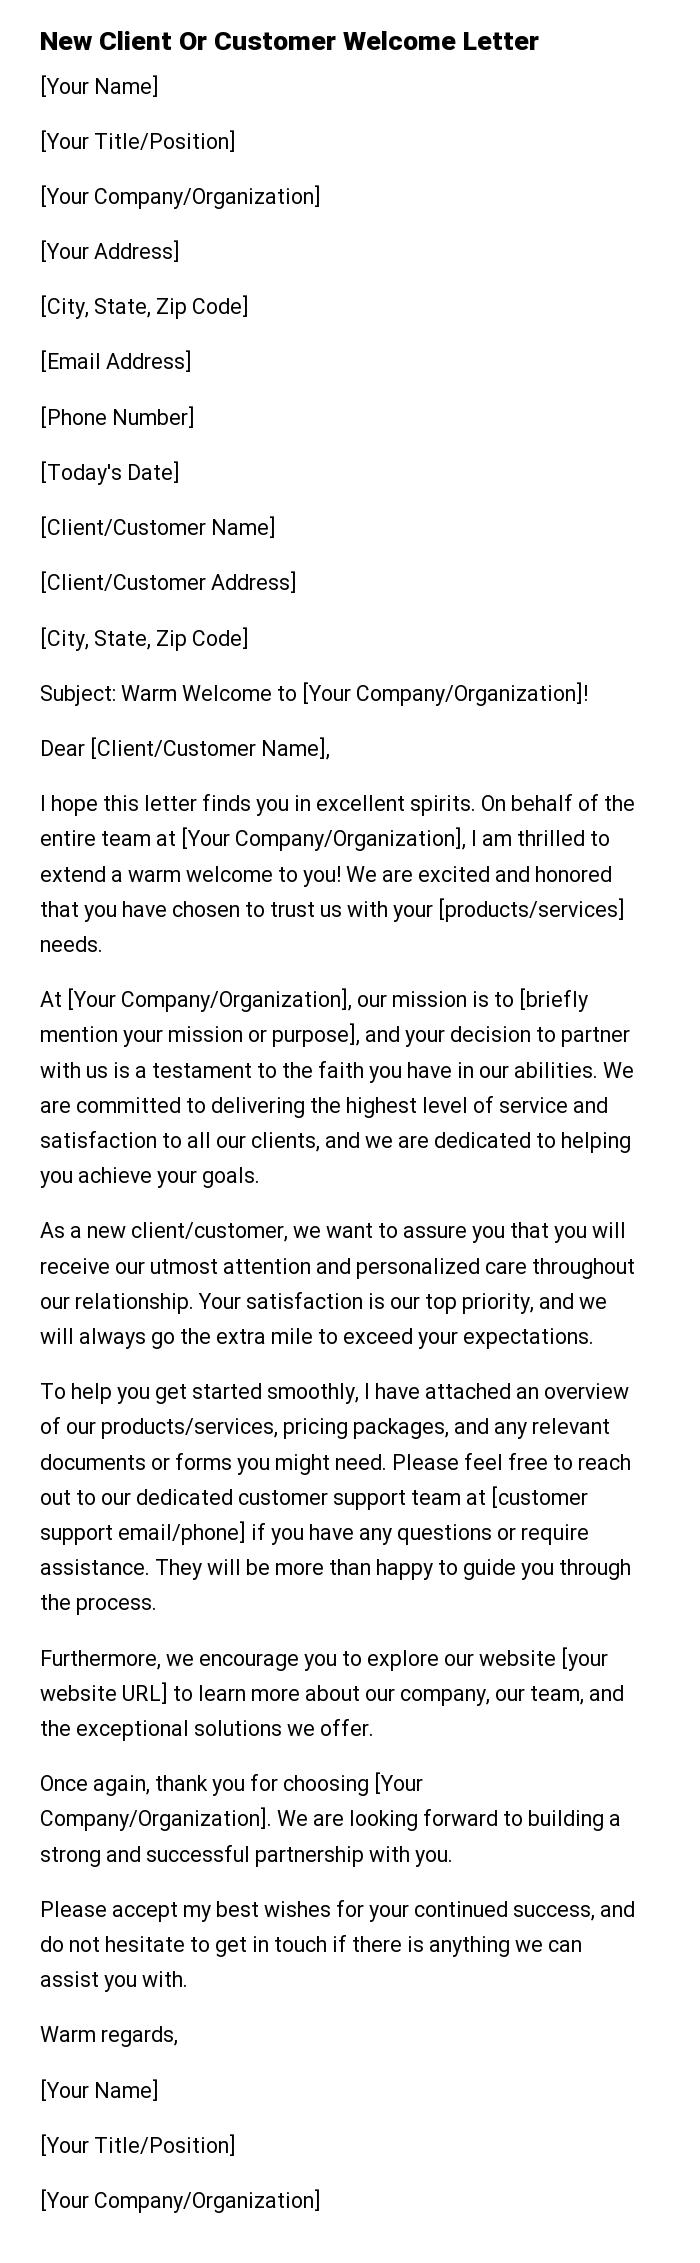 New Client Or Customer Welcome Letter